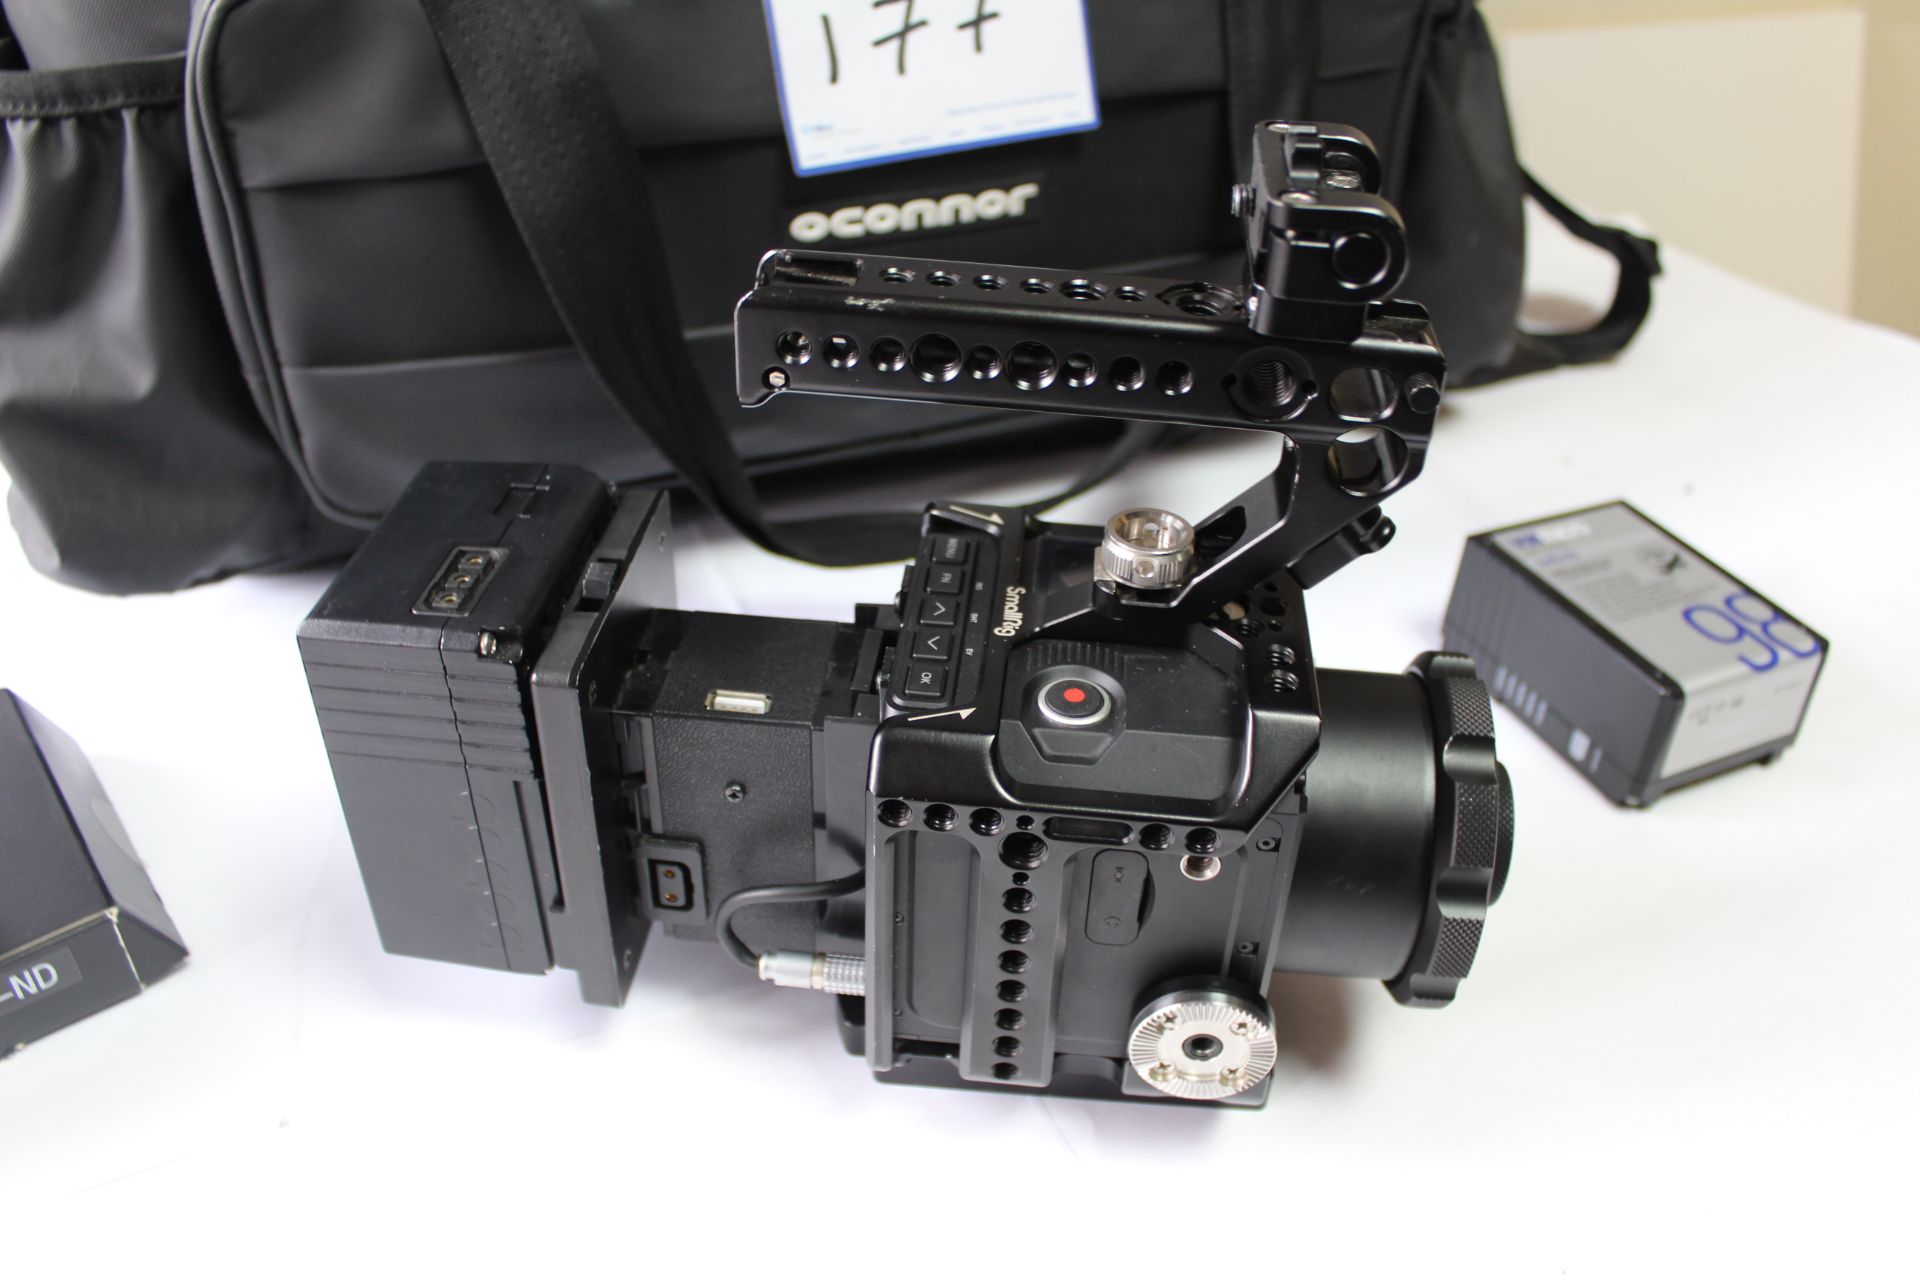 Z Cam E2-F6 Camera Body with 2 Batteries, Accessories and Carry Bag - Image 3 of 3